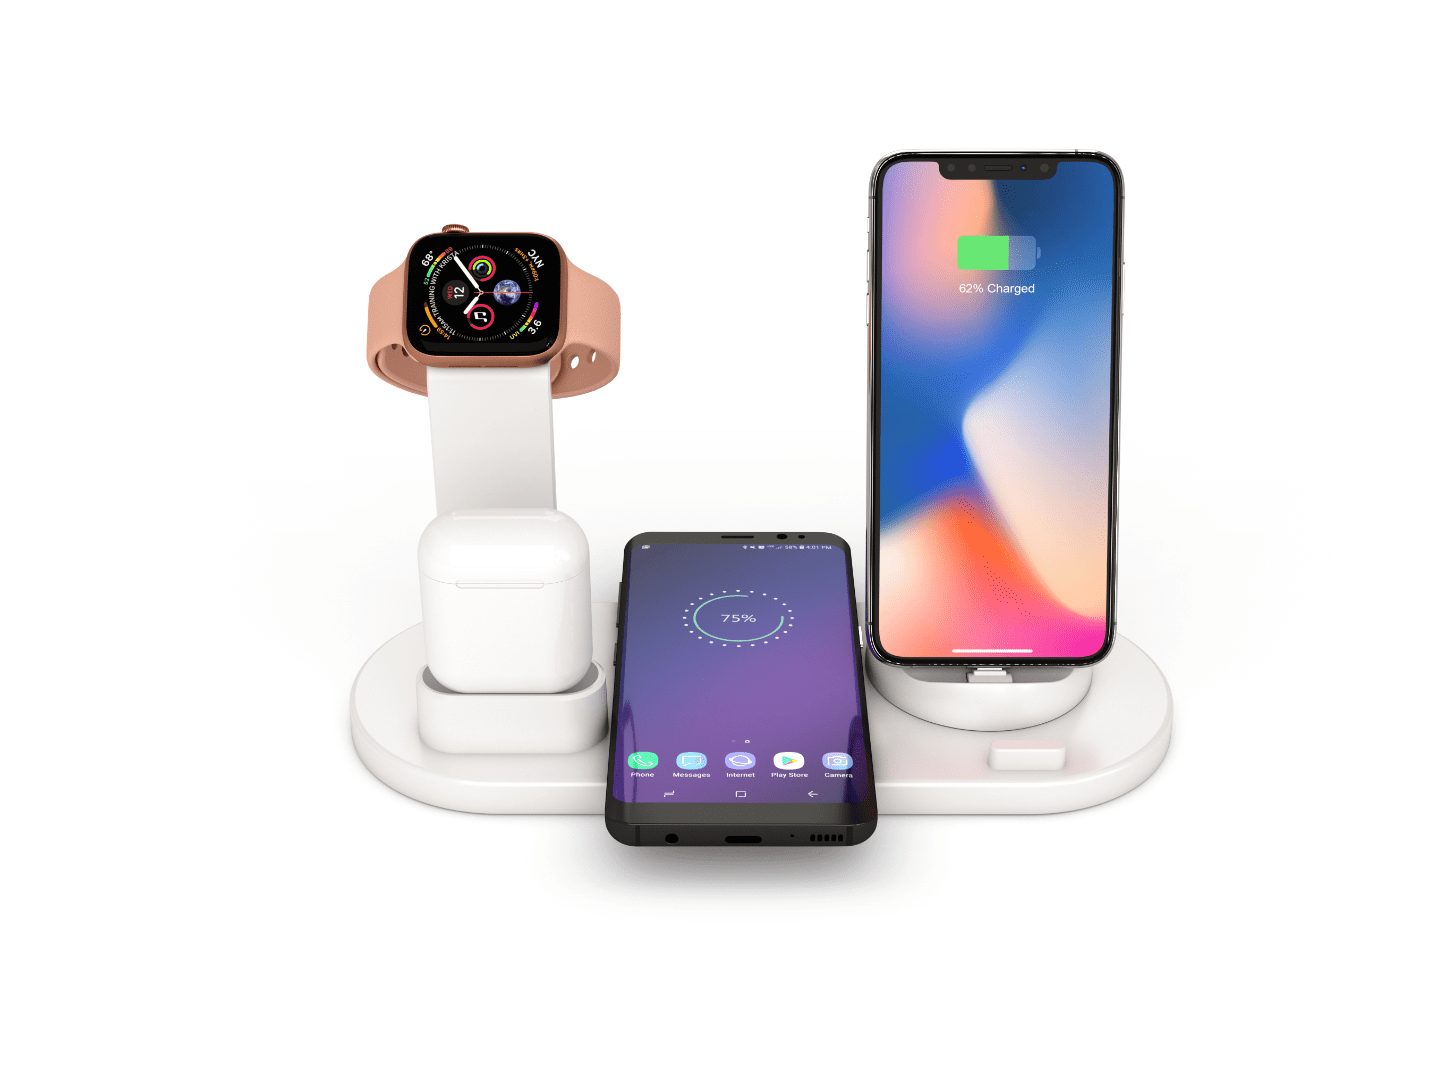 Black Friday Wireless Charger 3 In 1 Wireless Charging Stand Charging Station For Multiple Devices Qi Fast Wireless Charging Dock Compatible Iphone X Xs Xr Xs Max 8 8 Plus Airpods Walmart Com Walmart Com